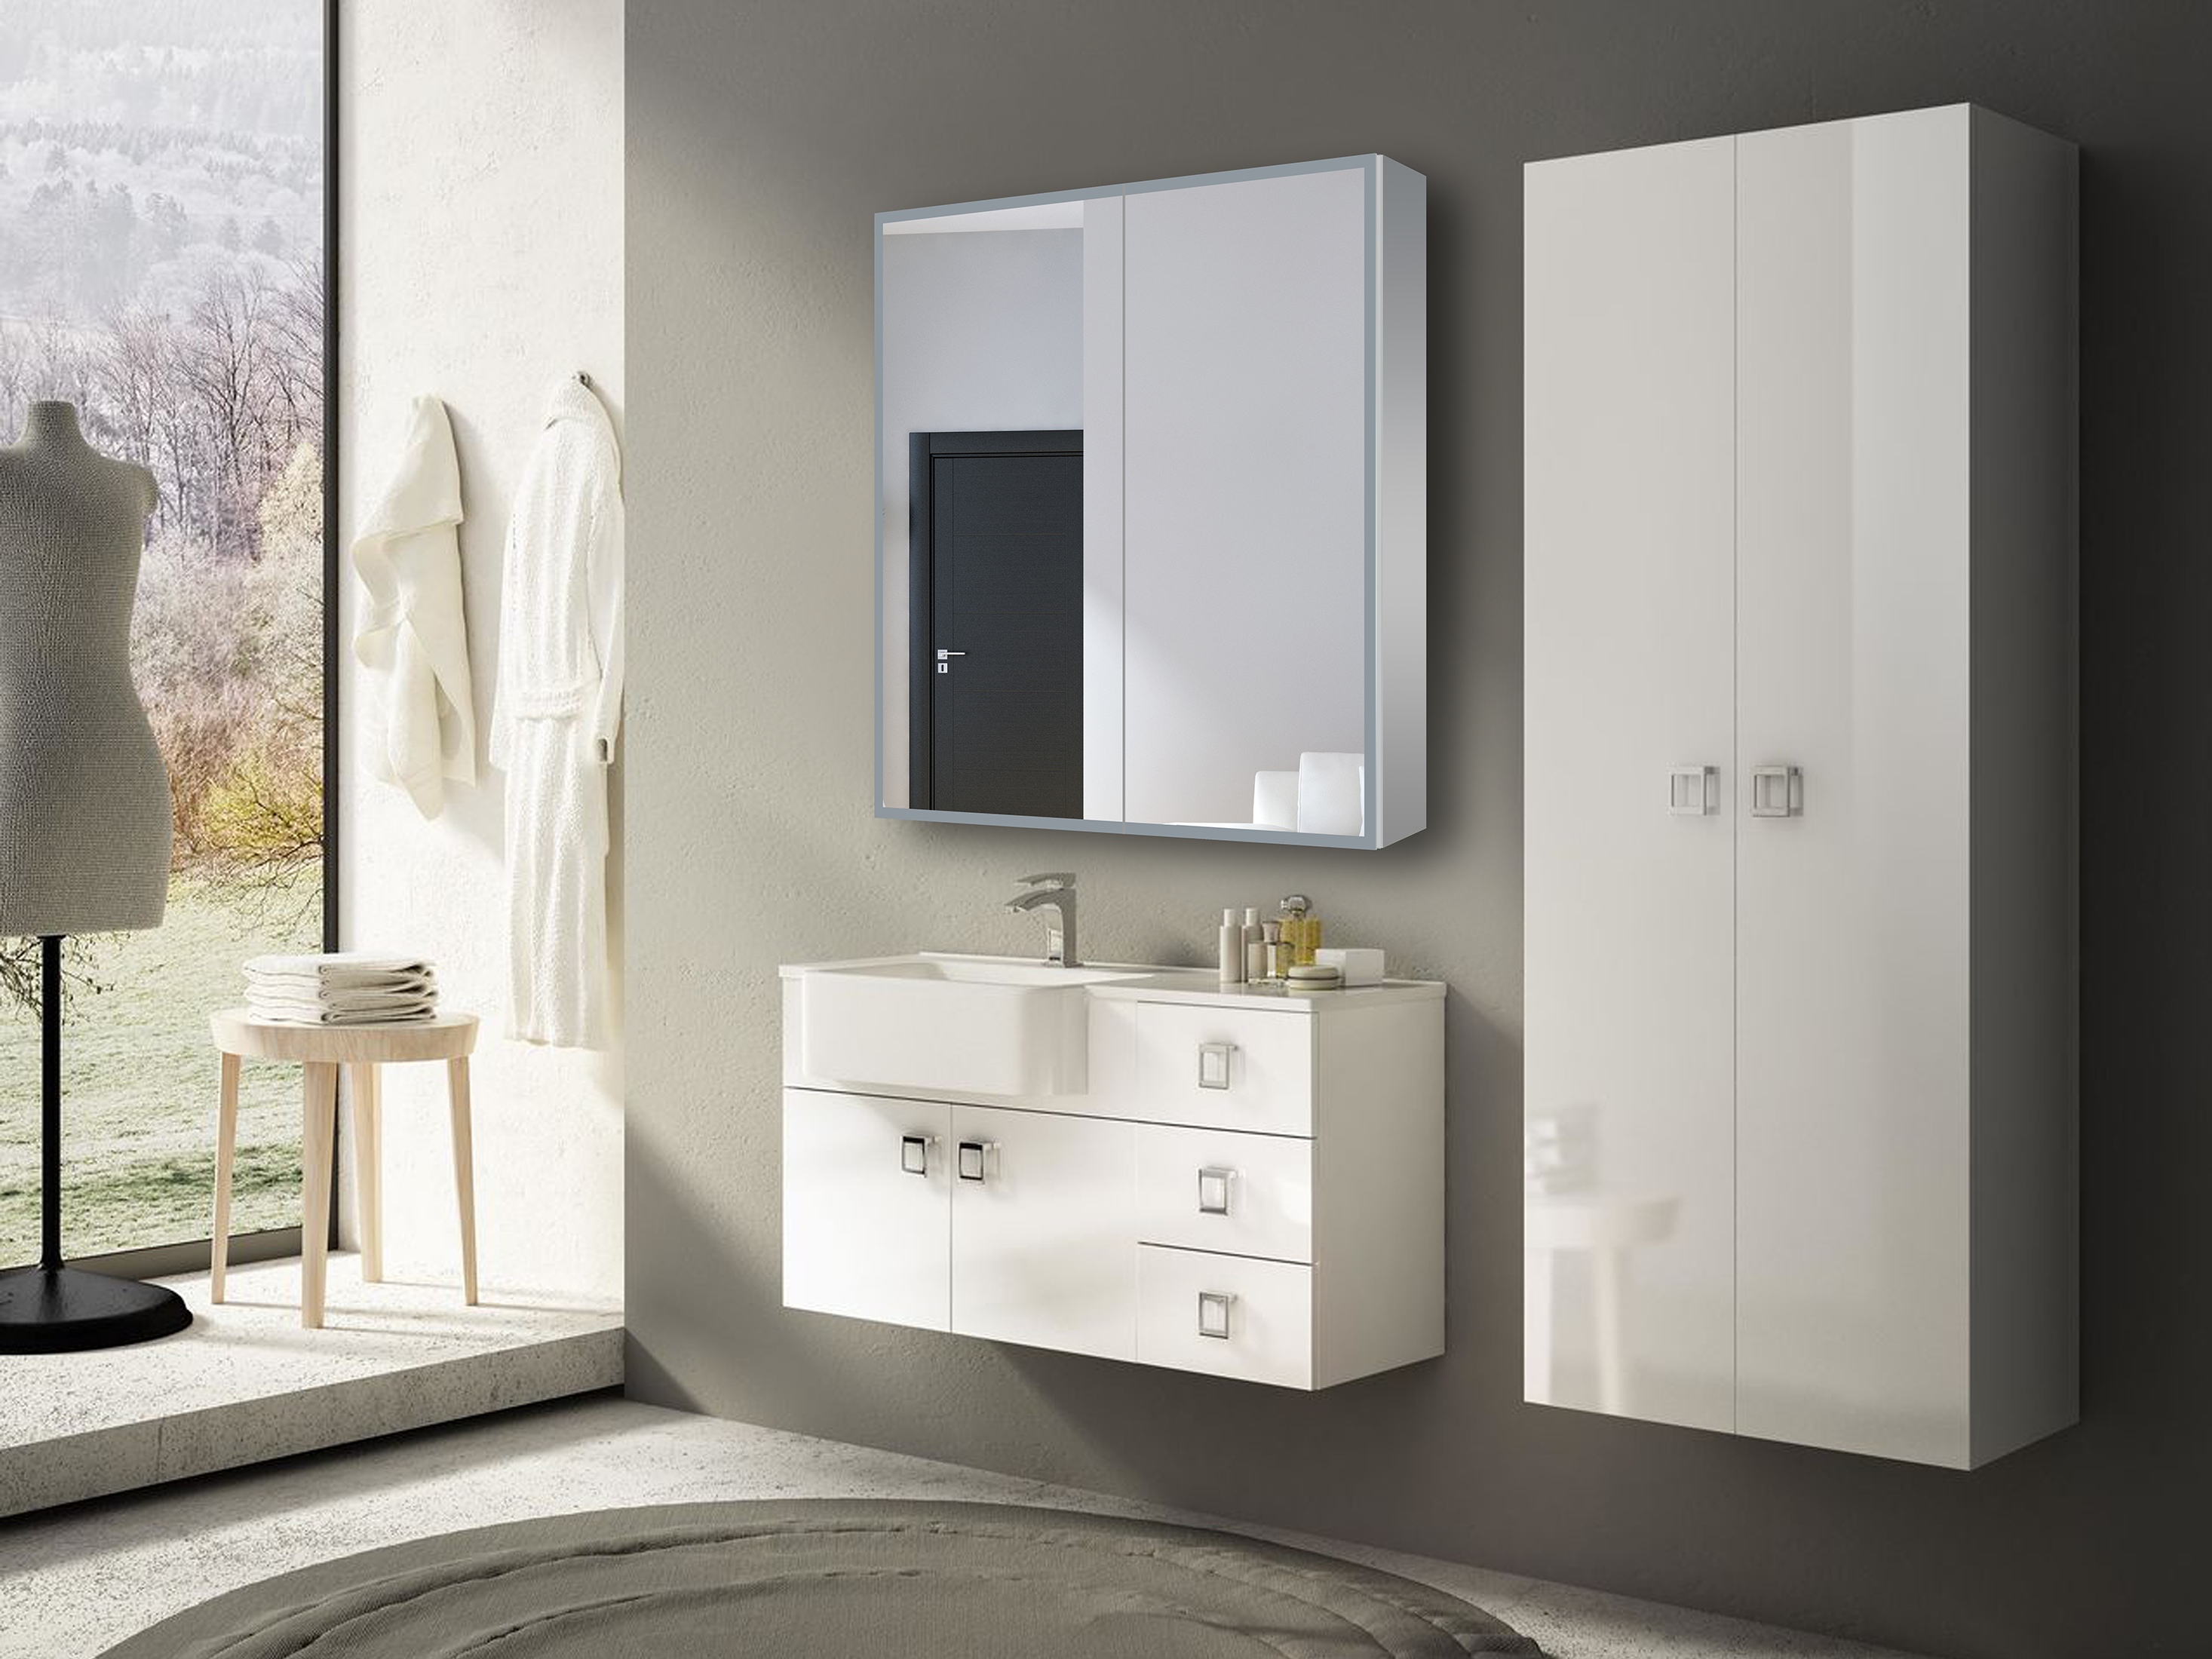 Dhalia LED Bathroom Medicine Cabinet with Defogger and Internal 3X Makeup Mirror - Available in 5 Sizes